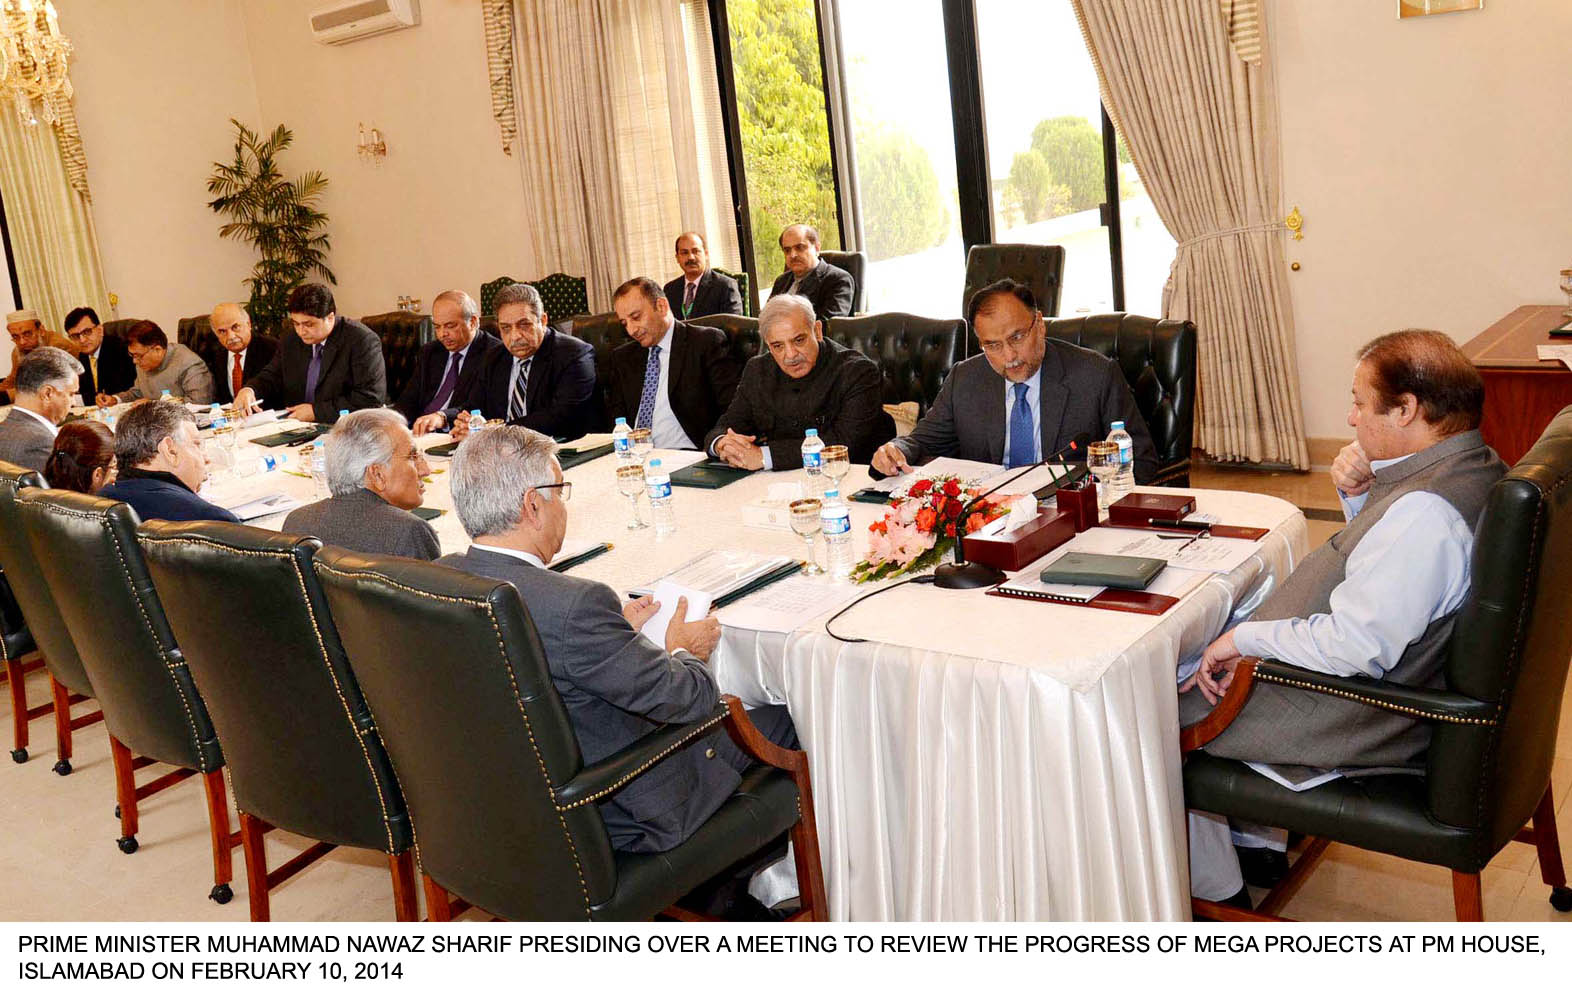 prime minister nawaz sharif chairing a meeting to review the progress of mega projects at pm house in islamabad on february 10 2014 photo pid